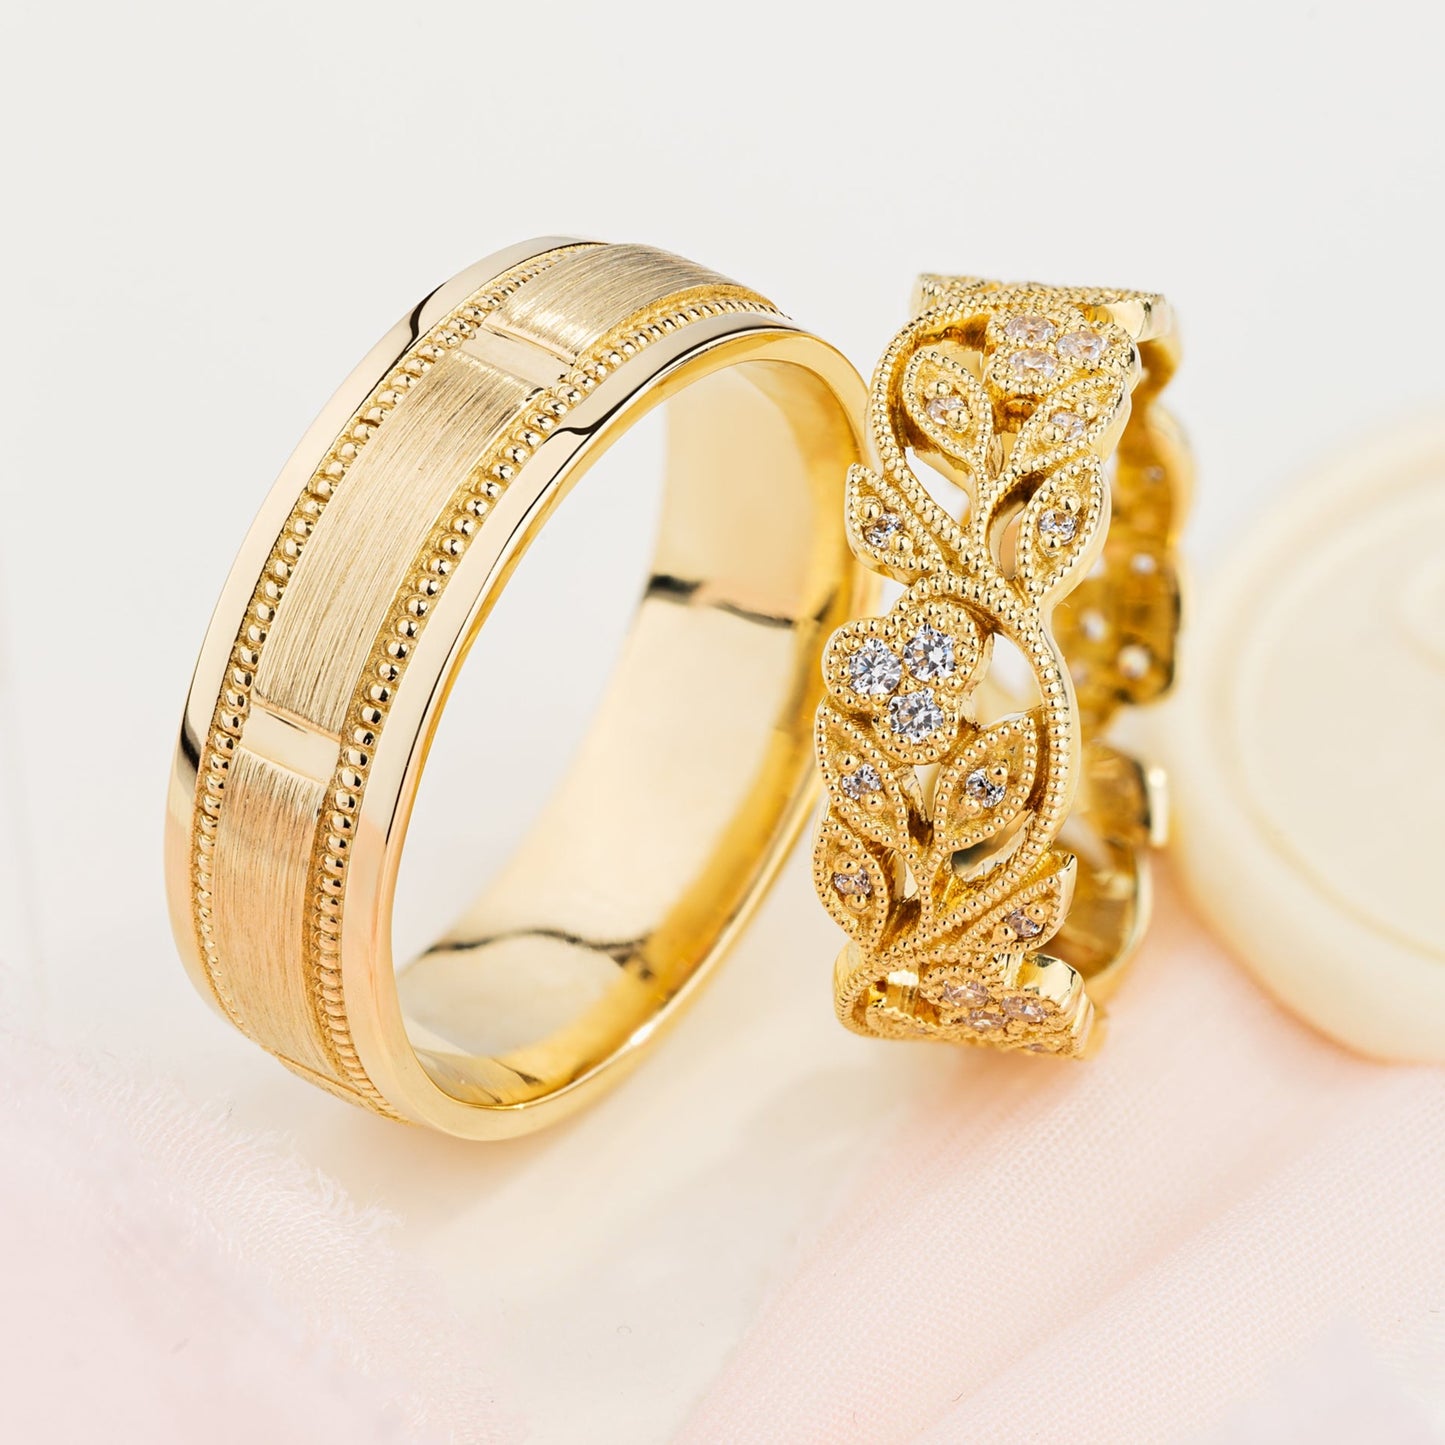 Gold wedding bands with diamonds. Unique wedding bands. Couple rings. His and hers wedding rings set. Bridal rings set. Gold wedding rings